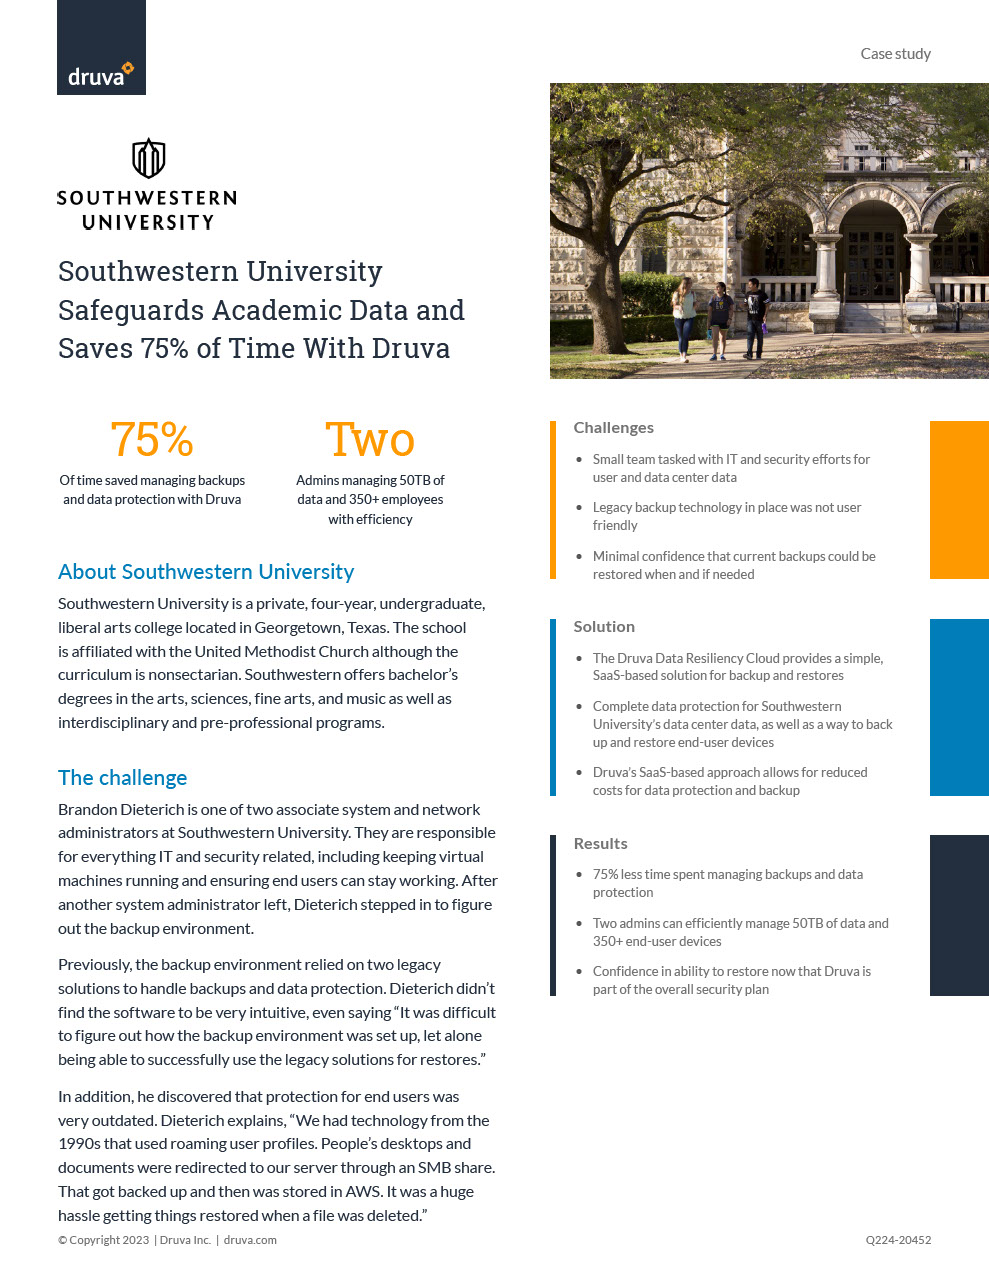 Southwestern University Safeguards Academic Data and Saves 75% of Time With Druva